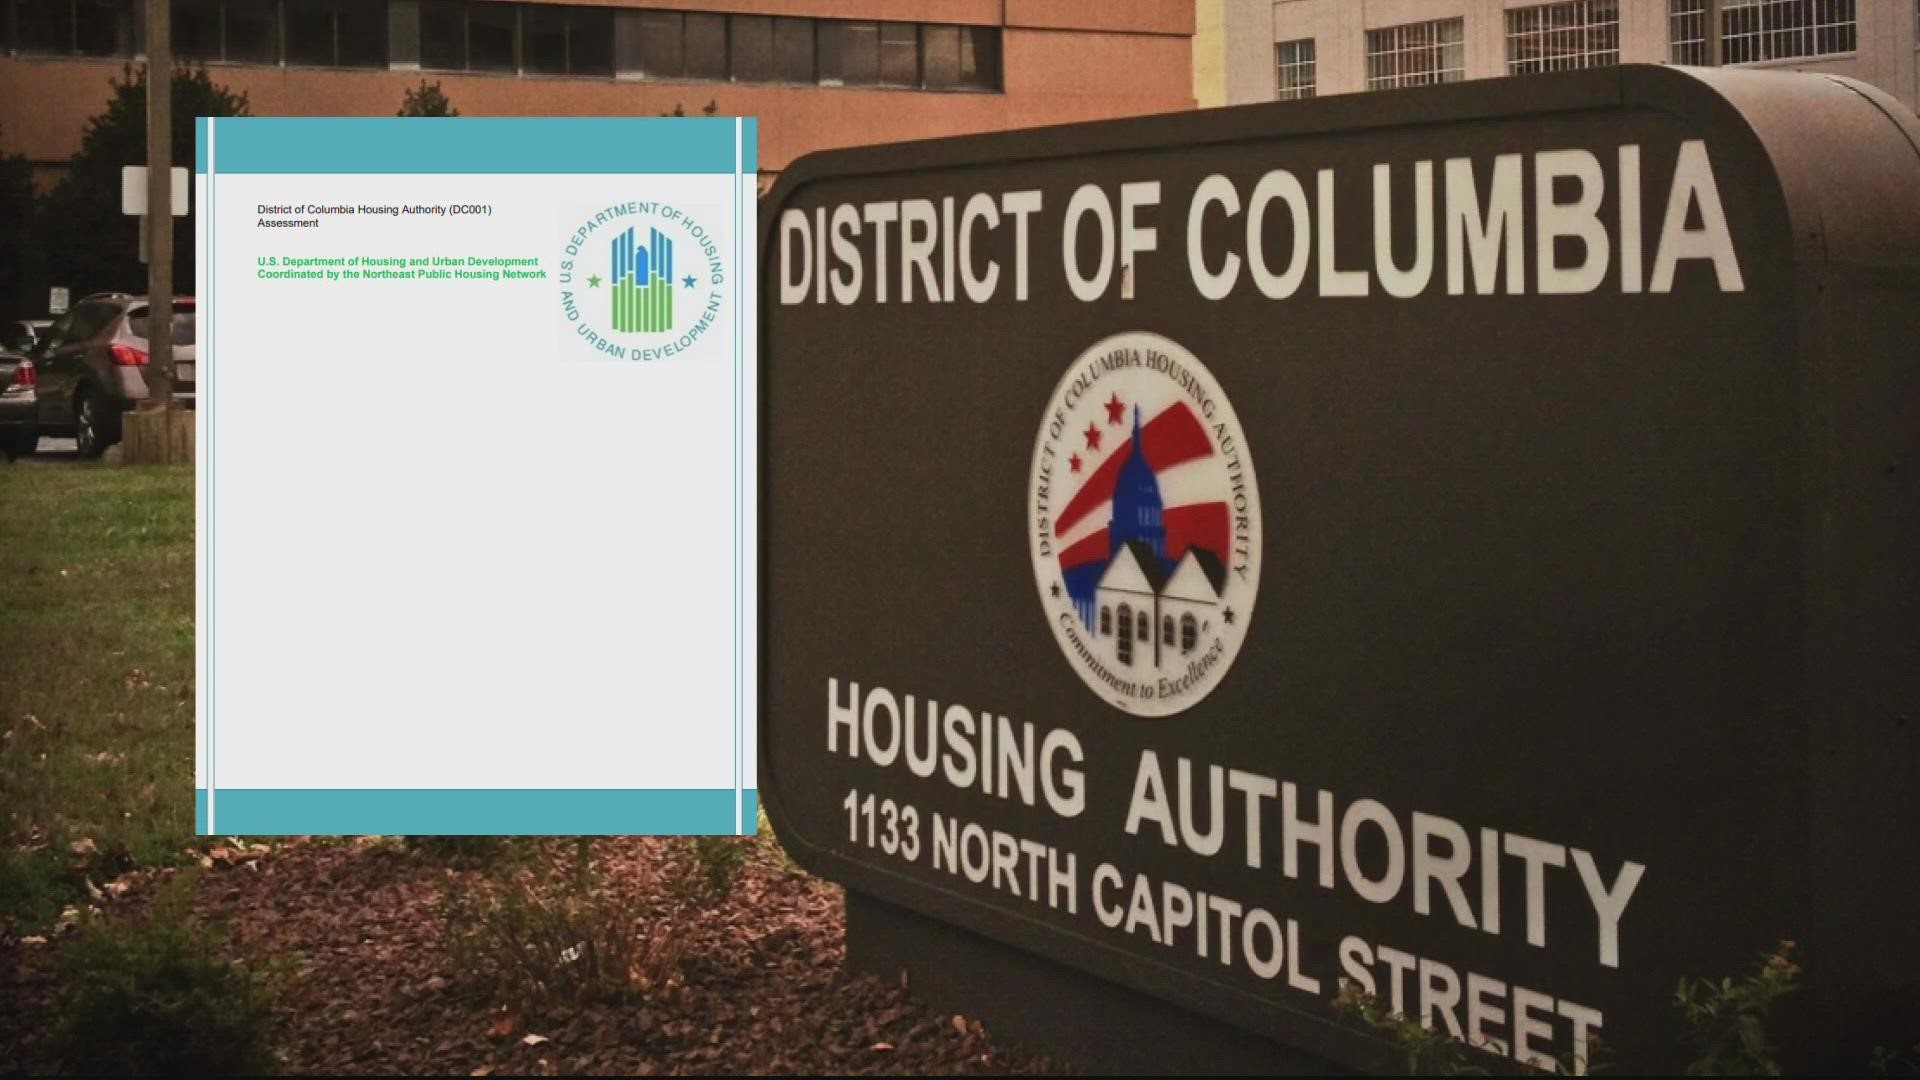 The 72-page report confirmed the DC Housing Authority has inadequate management, lack of compliance with federal law and poor oversight.